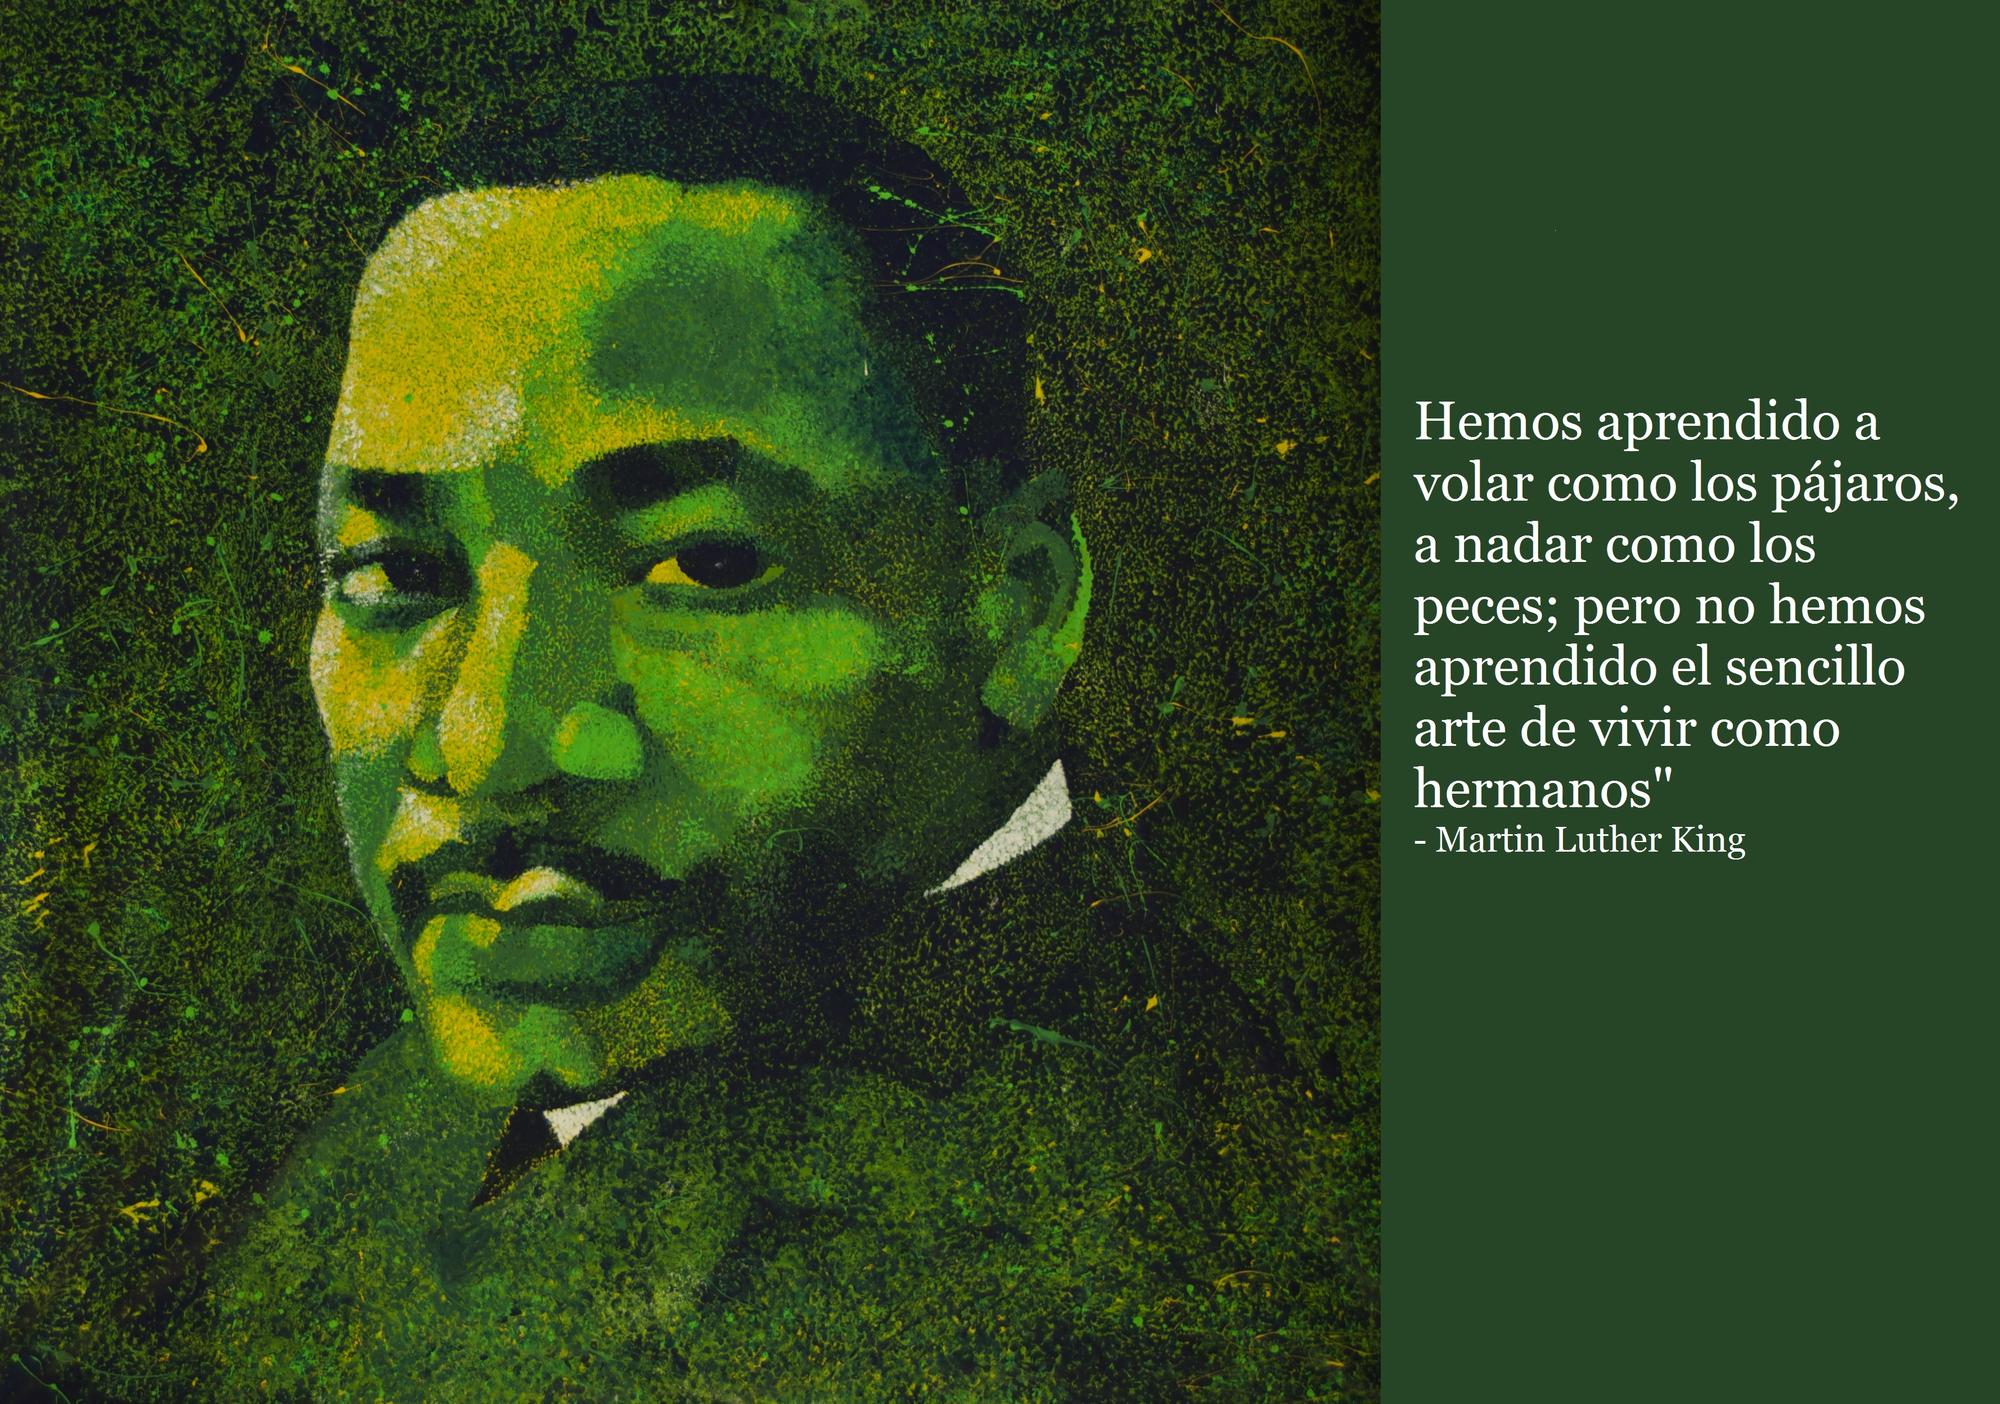 Martin Luther King 1